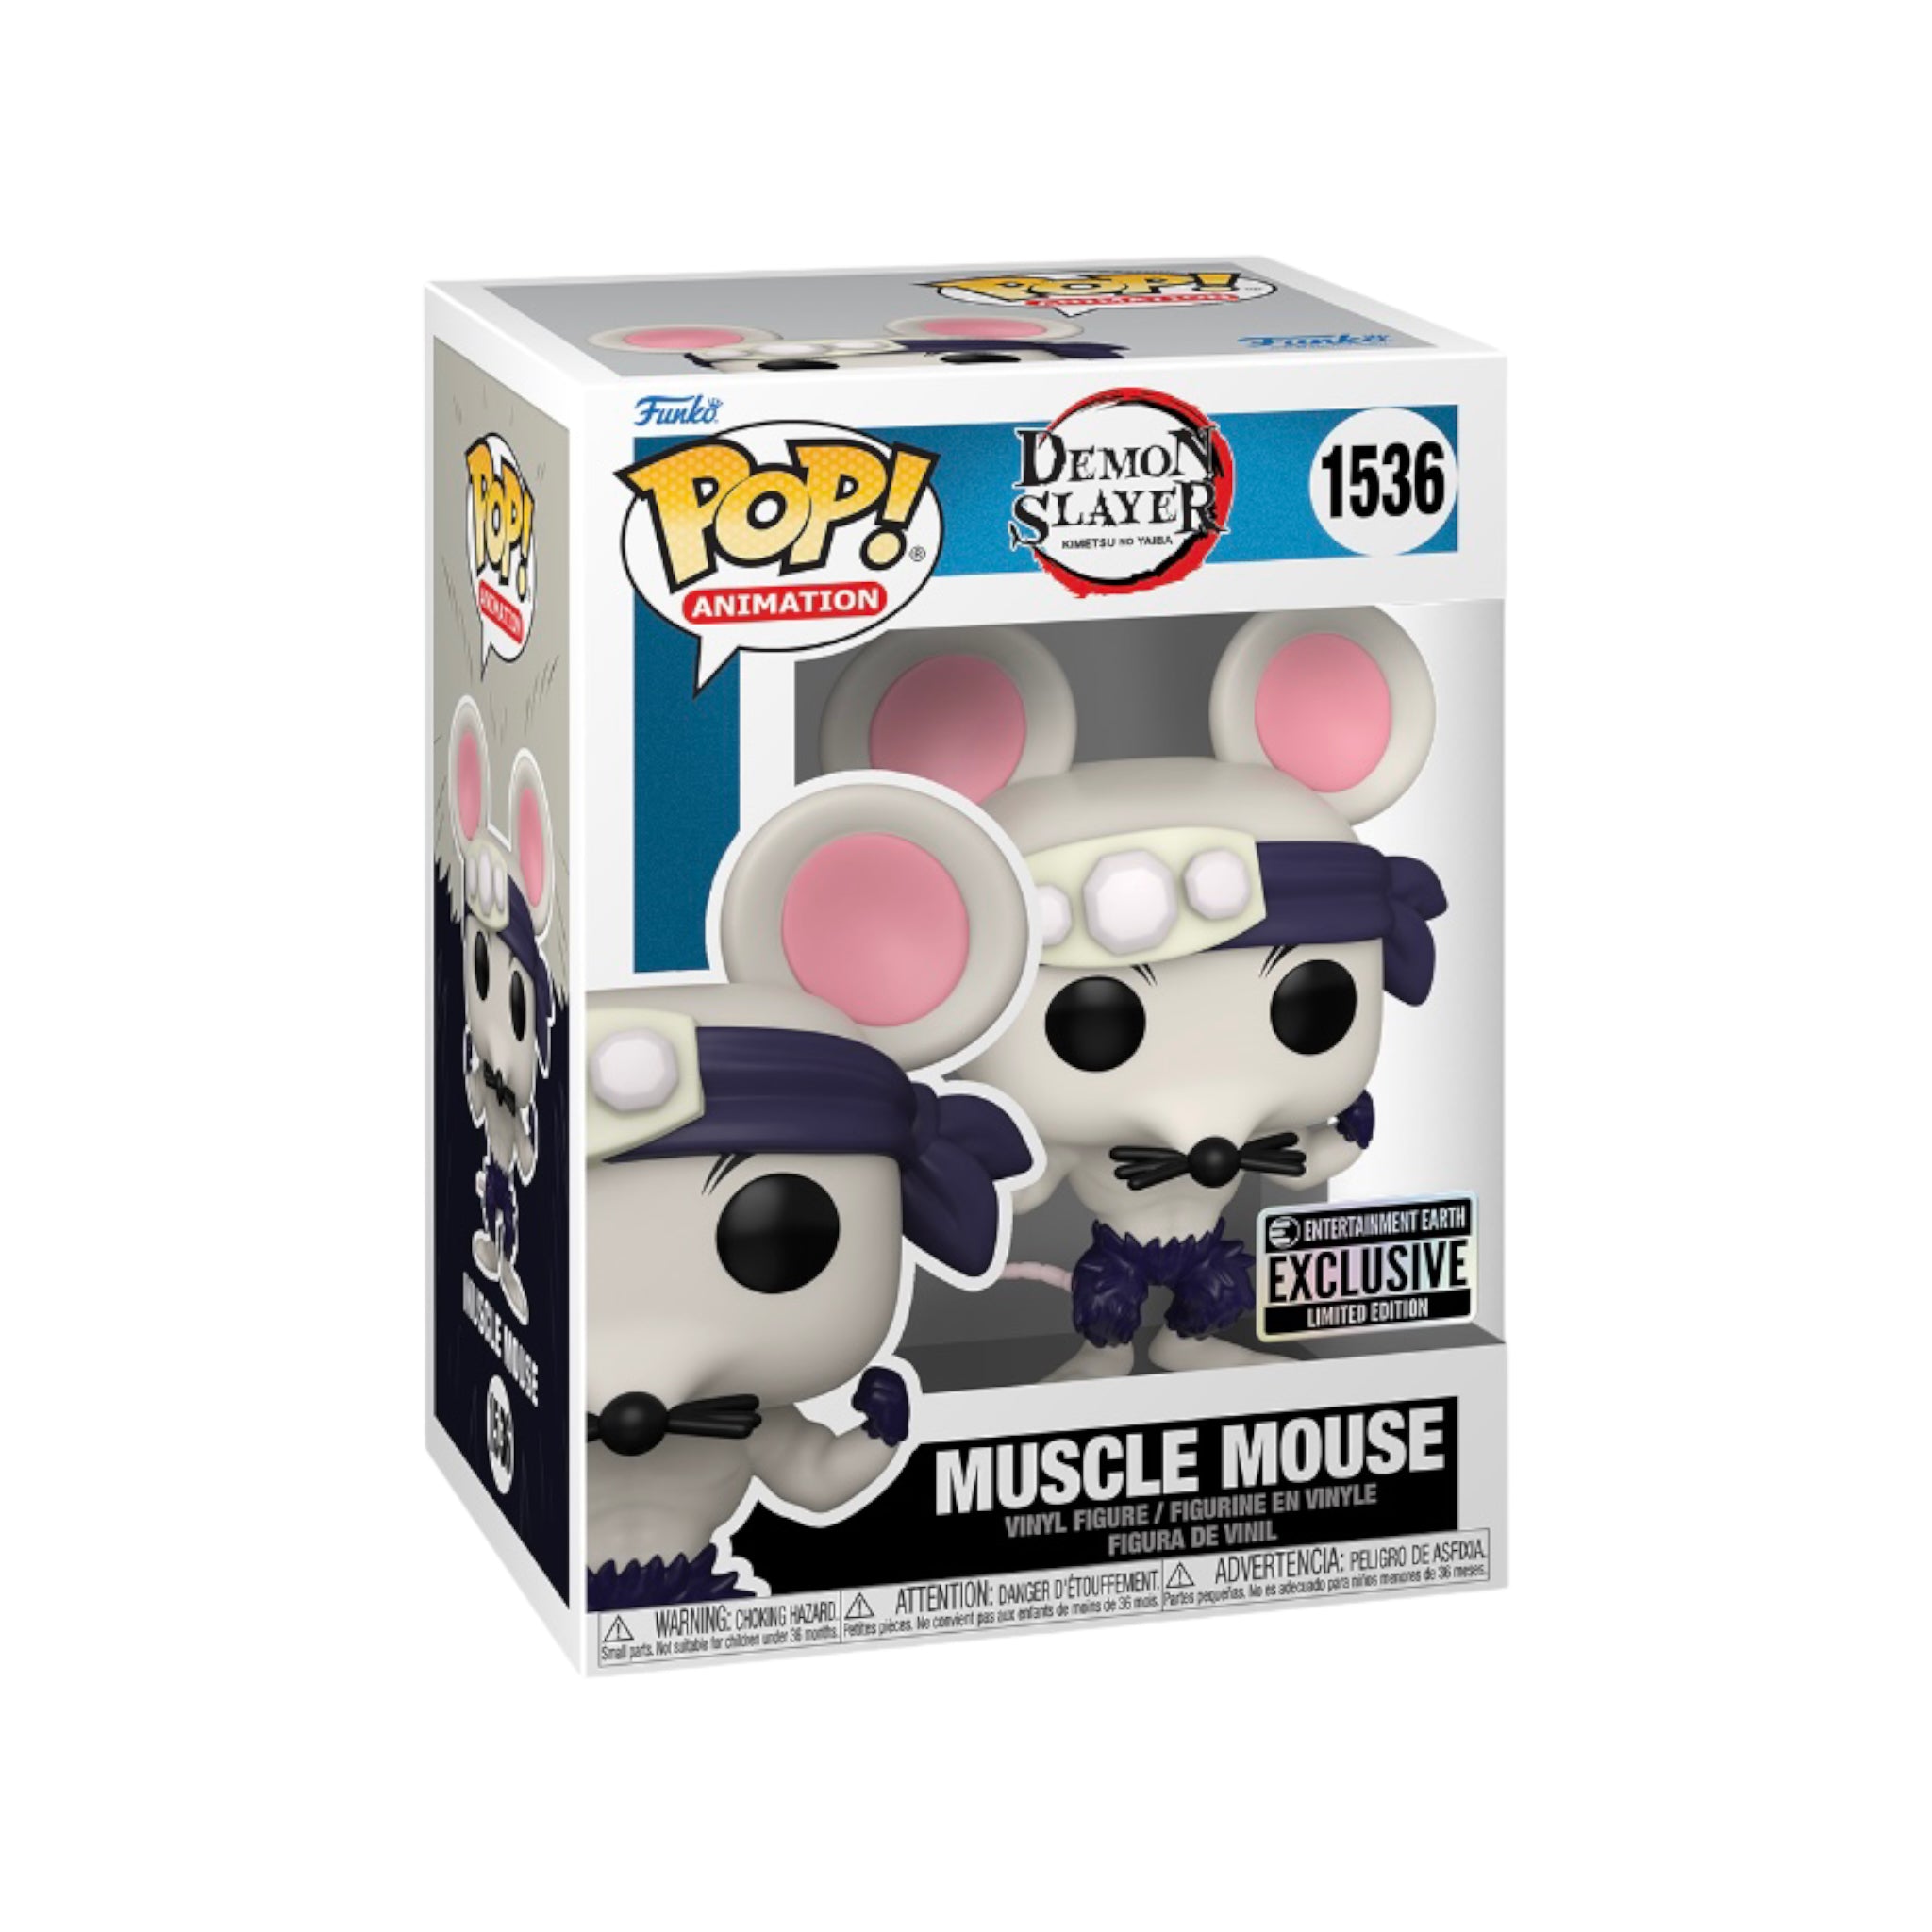 Muscle Mouse #1536 Funko Pop! - Demon Slayer - Entertainment Earth Exclusive